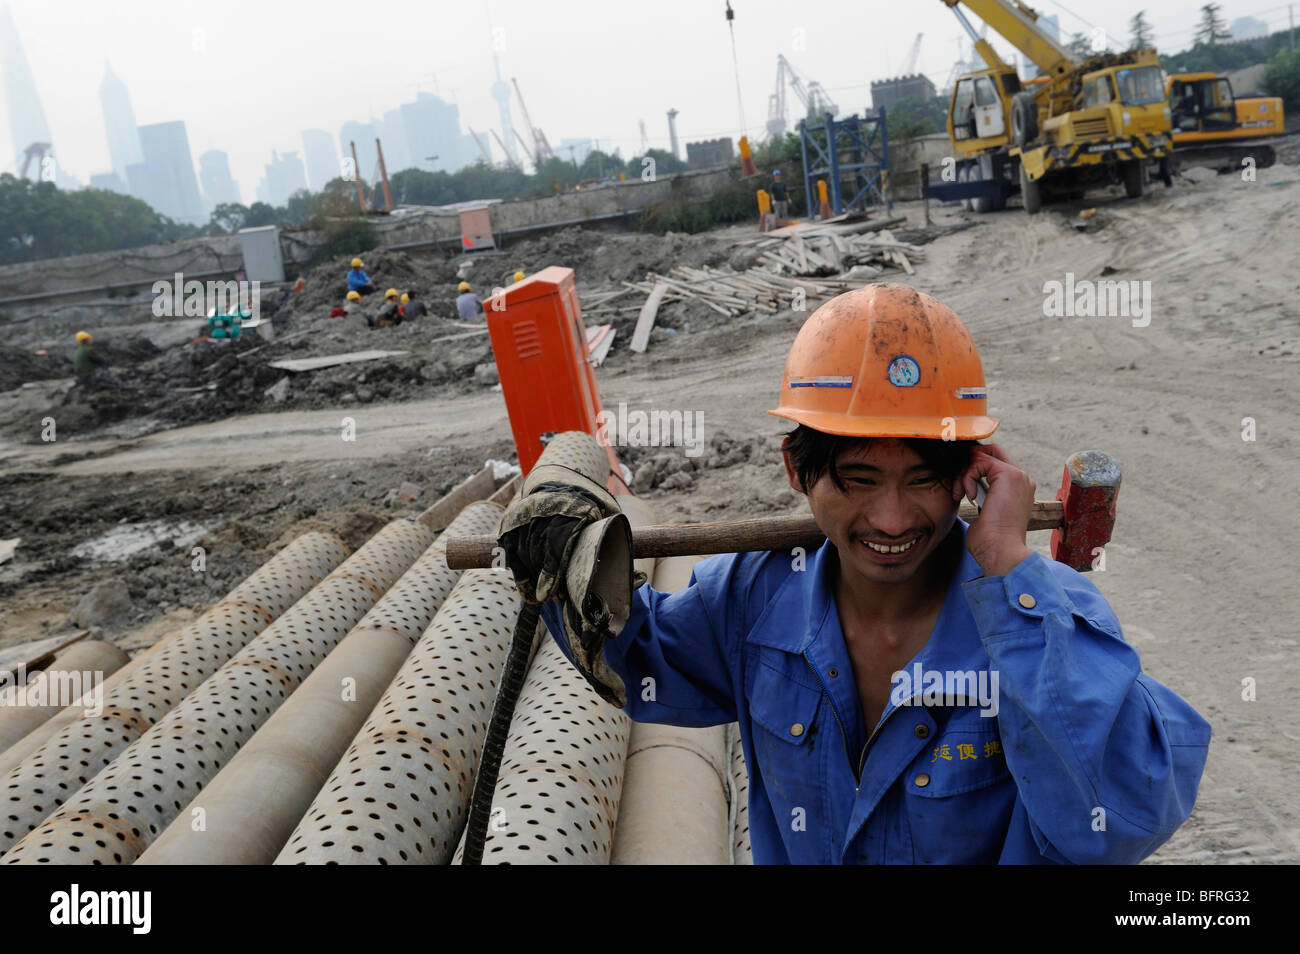 chinese-worker-using-his-moblie-phone-in-a-construction-site-in-shanghai-BFRG32.jpg